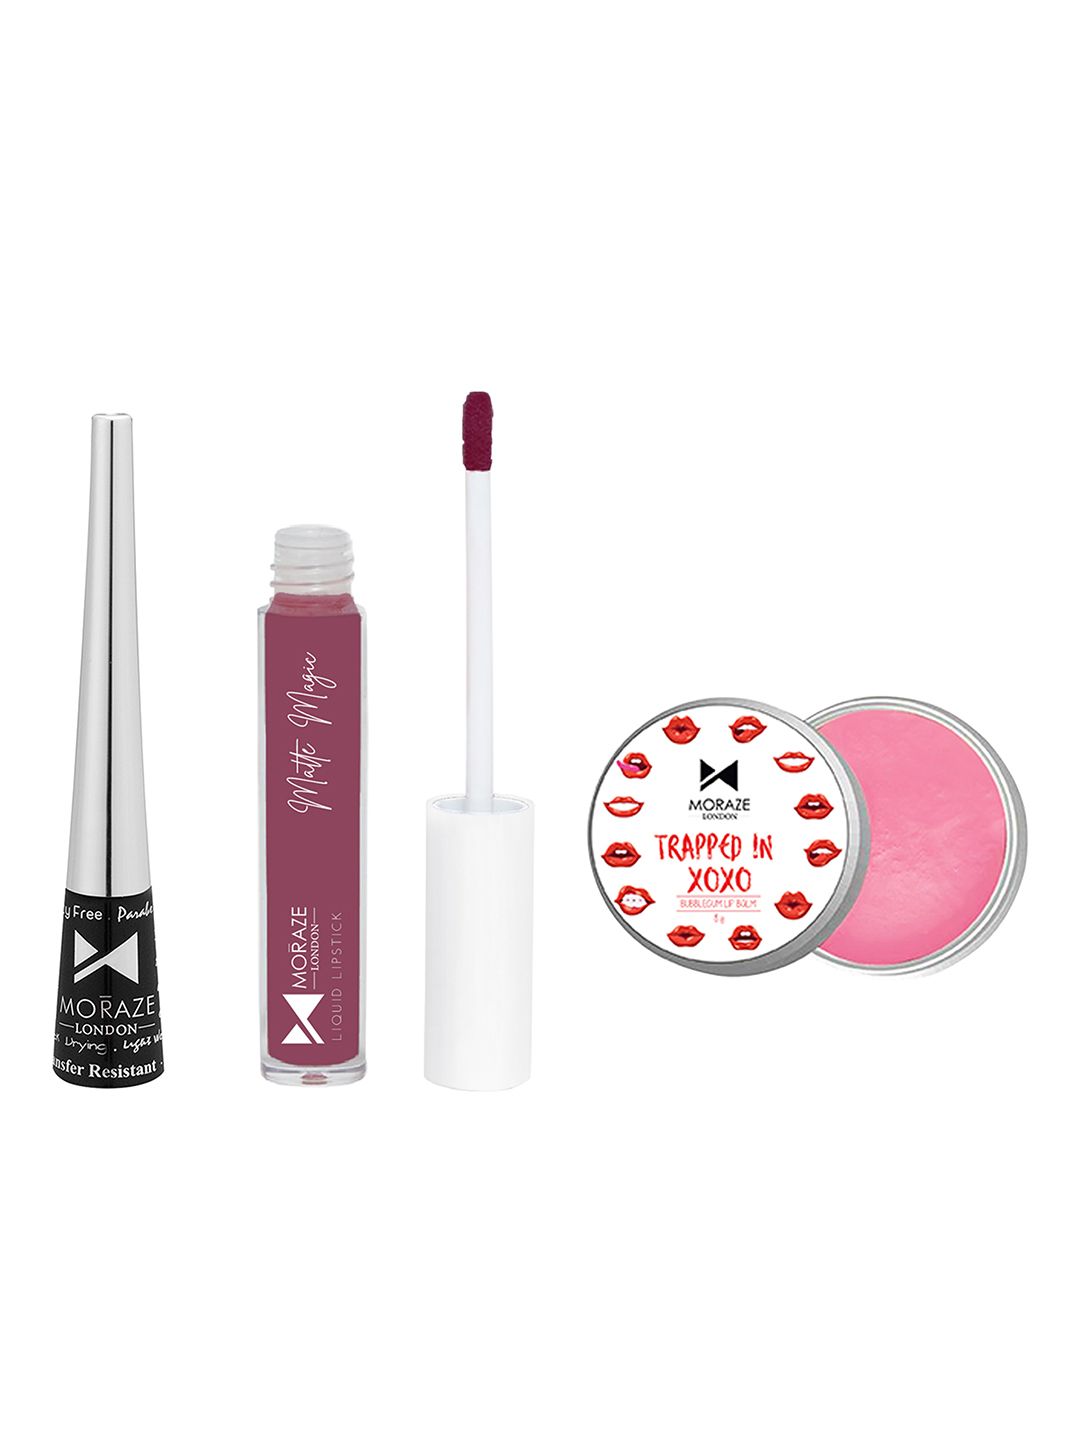 Moraze Combo Pack Of 1 Lipstick (You Go) With 1 Eyeliner And 1 Lip Balm (Bubblegum) Price in India